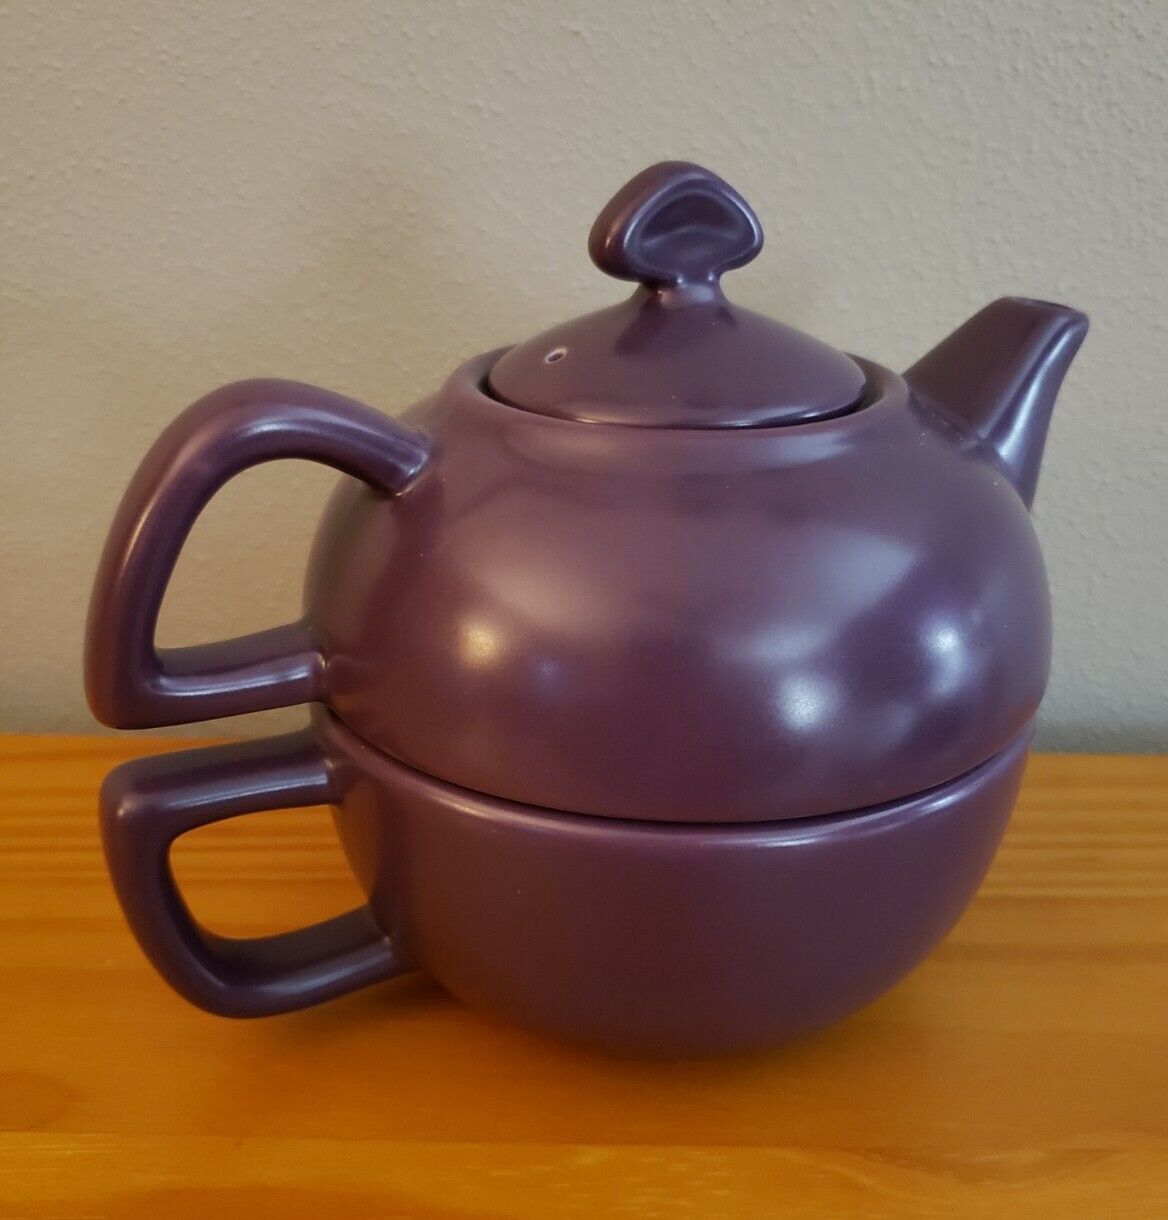 Chantal Tea for One 92-TPC10 Ceramic Teapot Lid And Cup Combo, Aubergine Purple